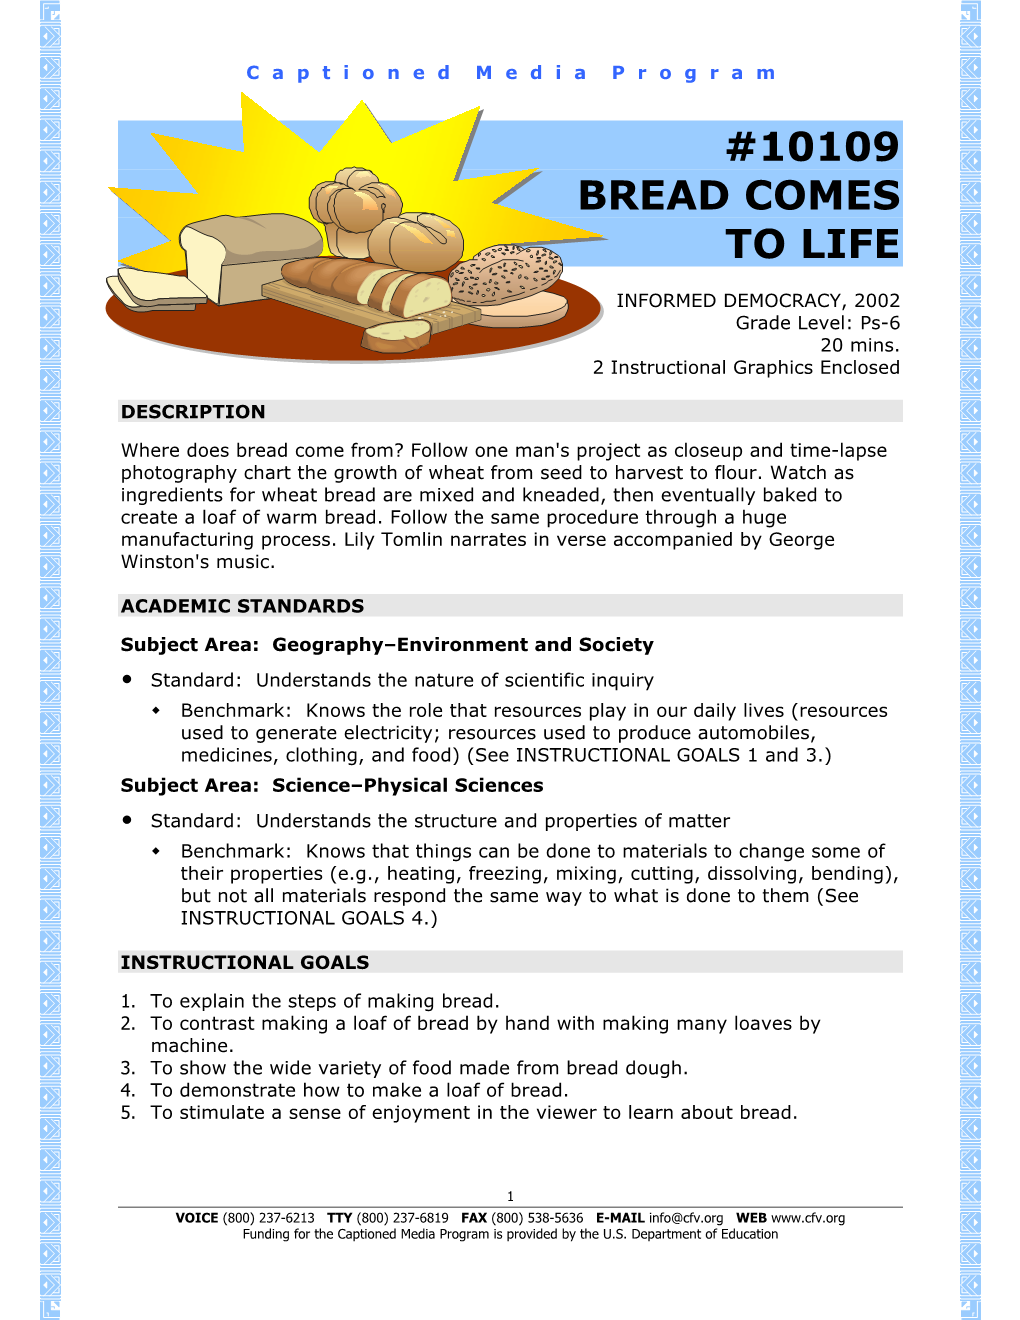 10109 Bread Comes to Life